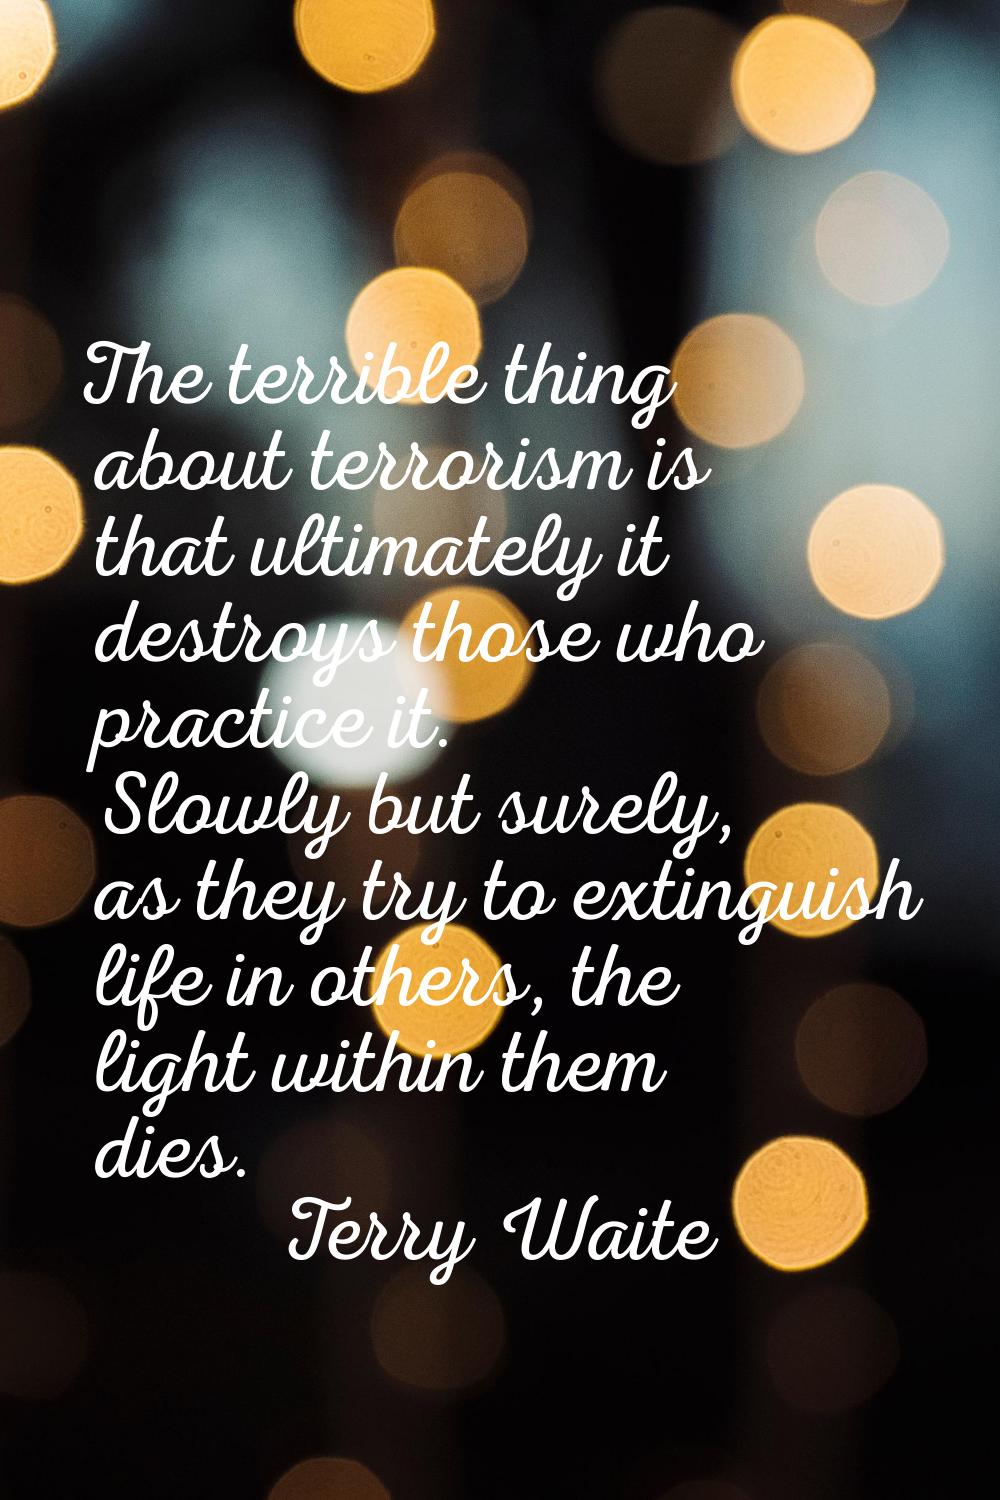 The terrible thing about terrorism is that ultimately it destroys those who practice it. Slowly but